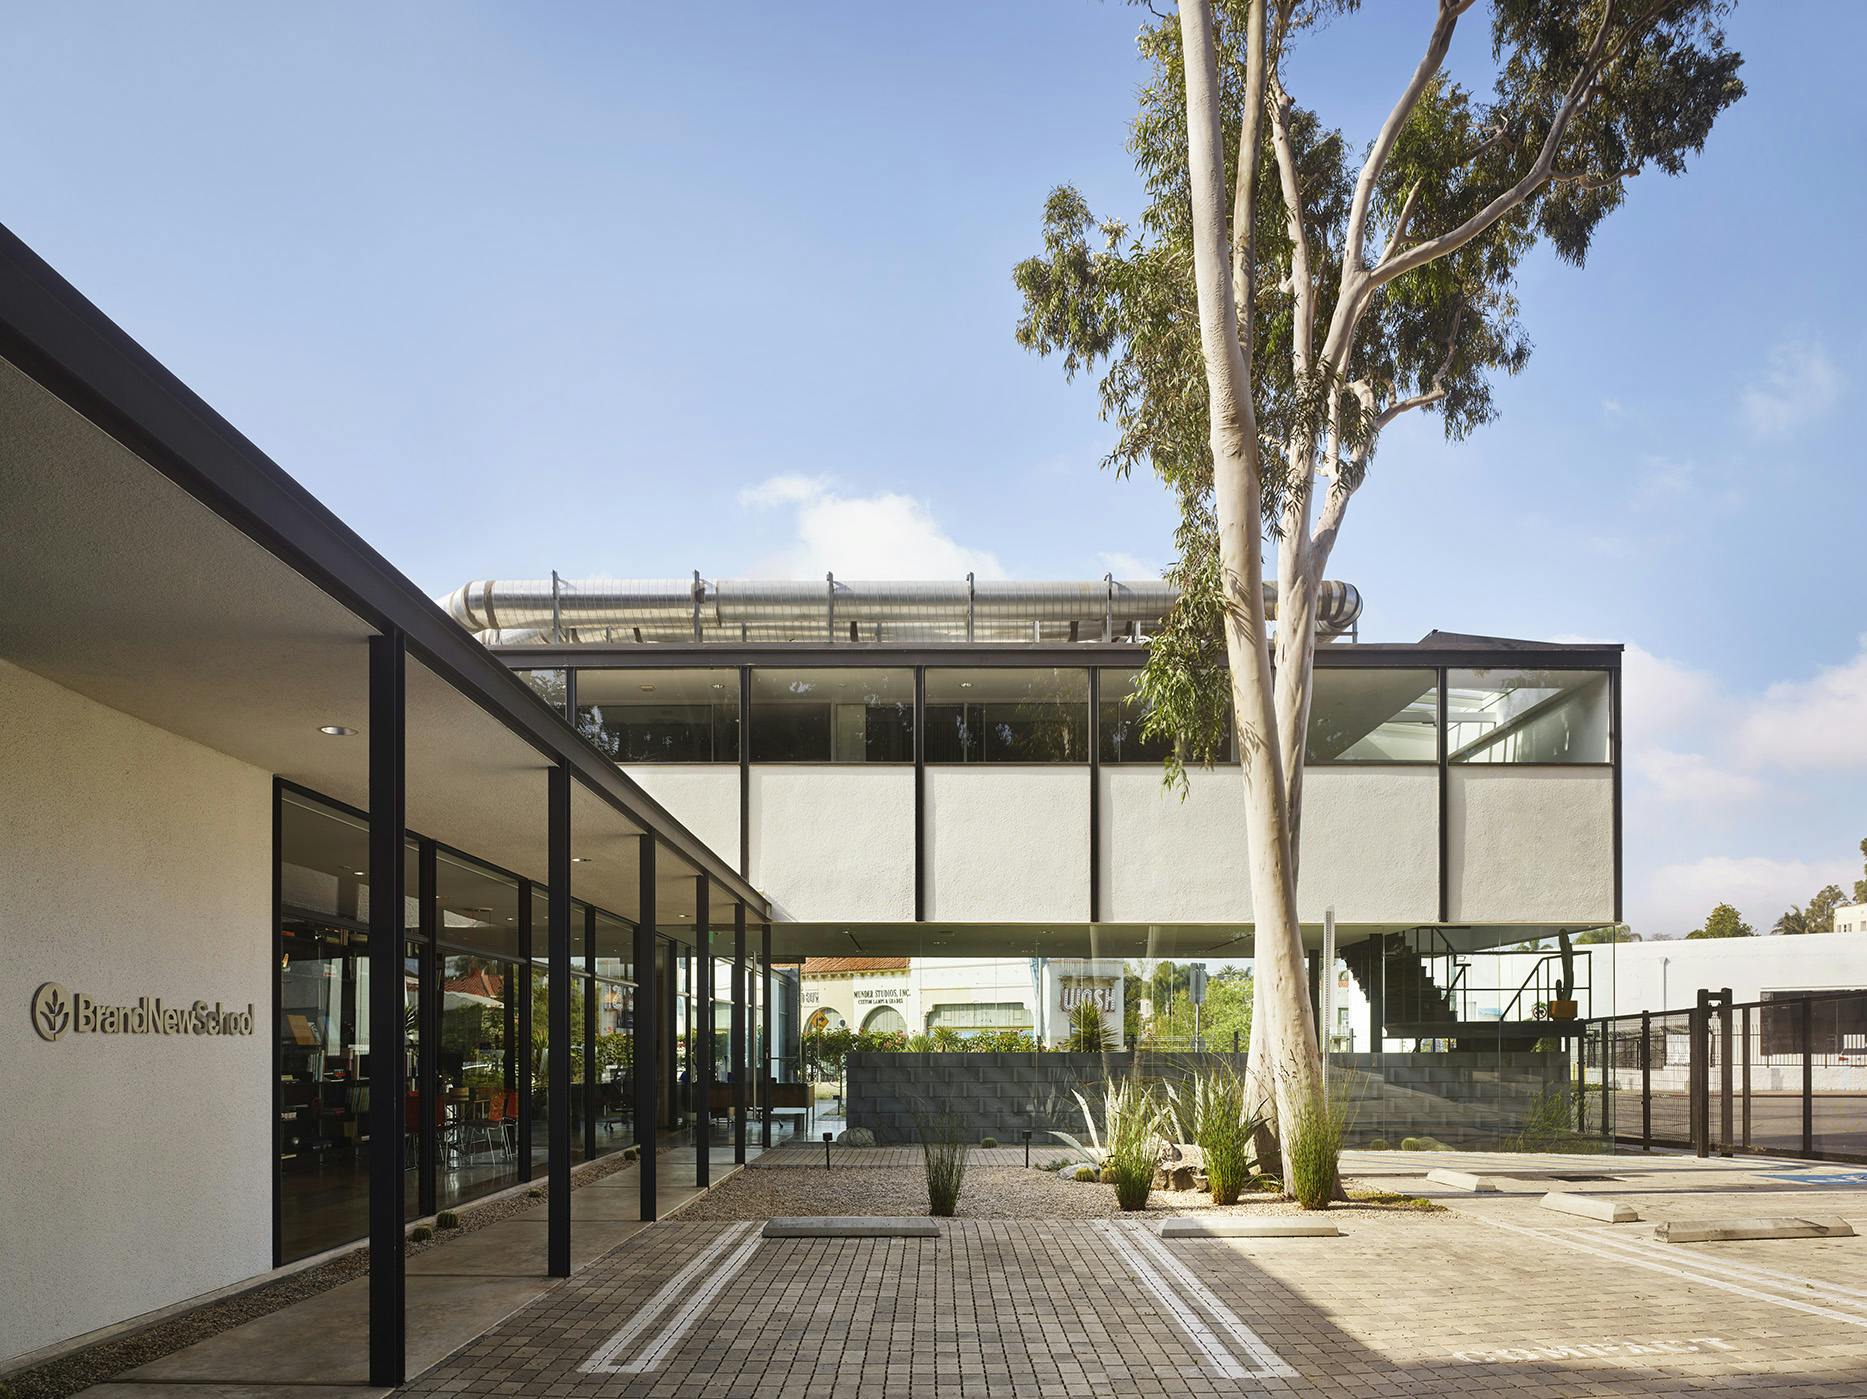 Exterior view of the BNS office LA featuring a eucalyptus tree and a midcentury modern building with an overhang with a glassroom below.